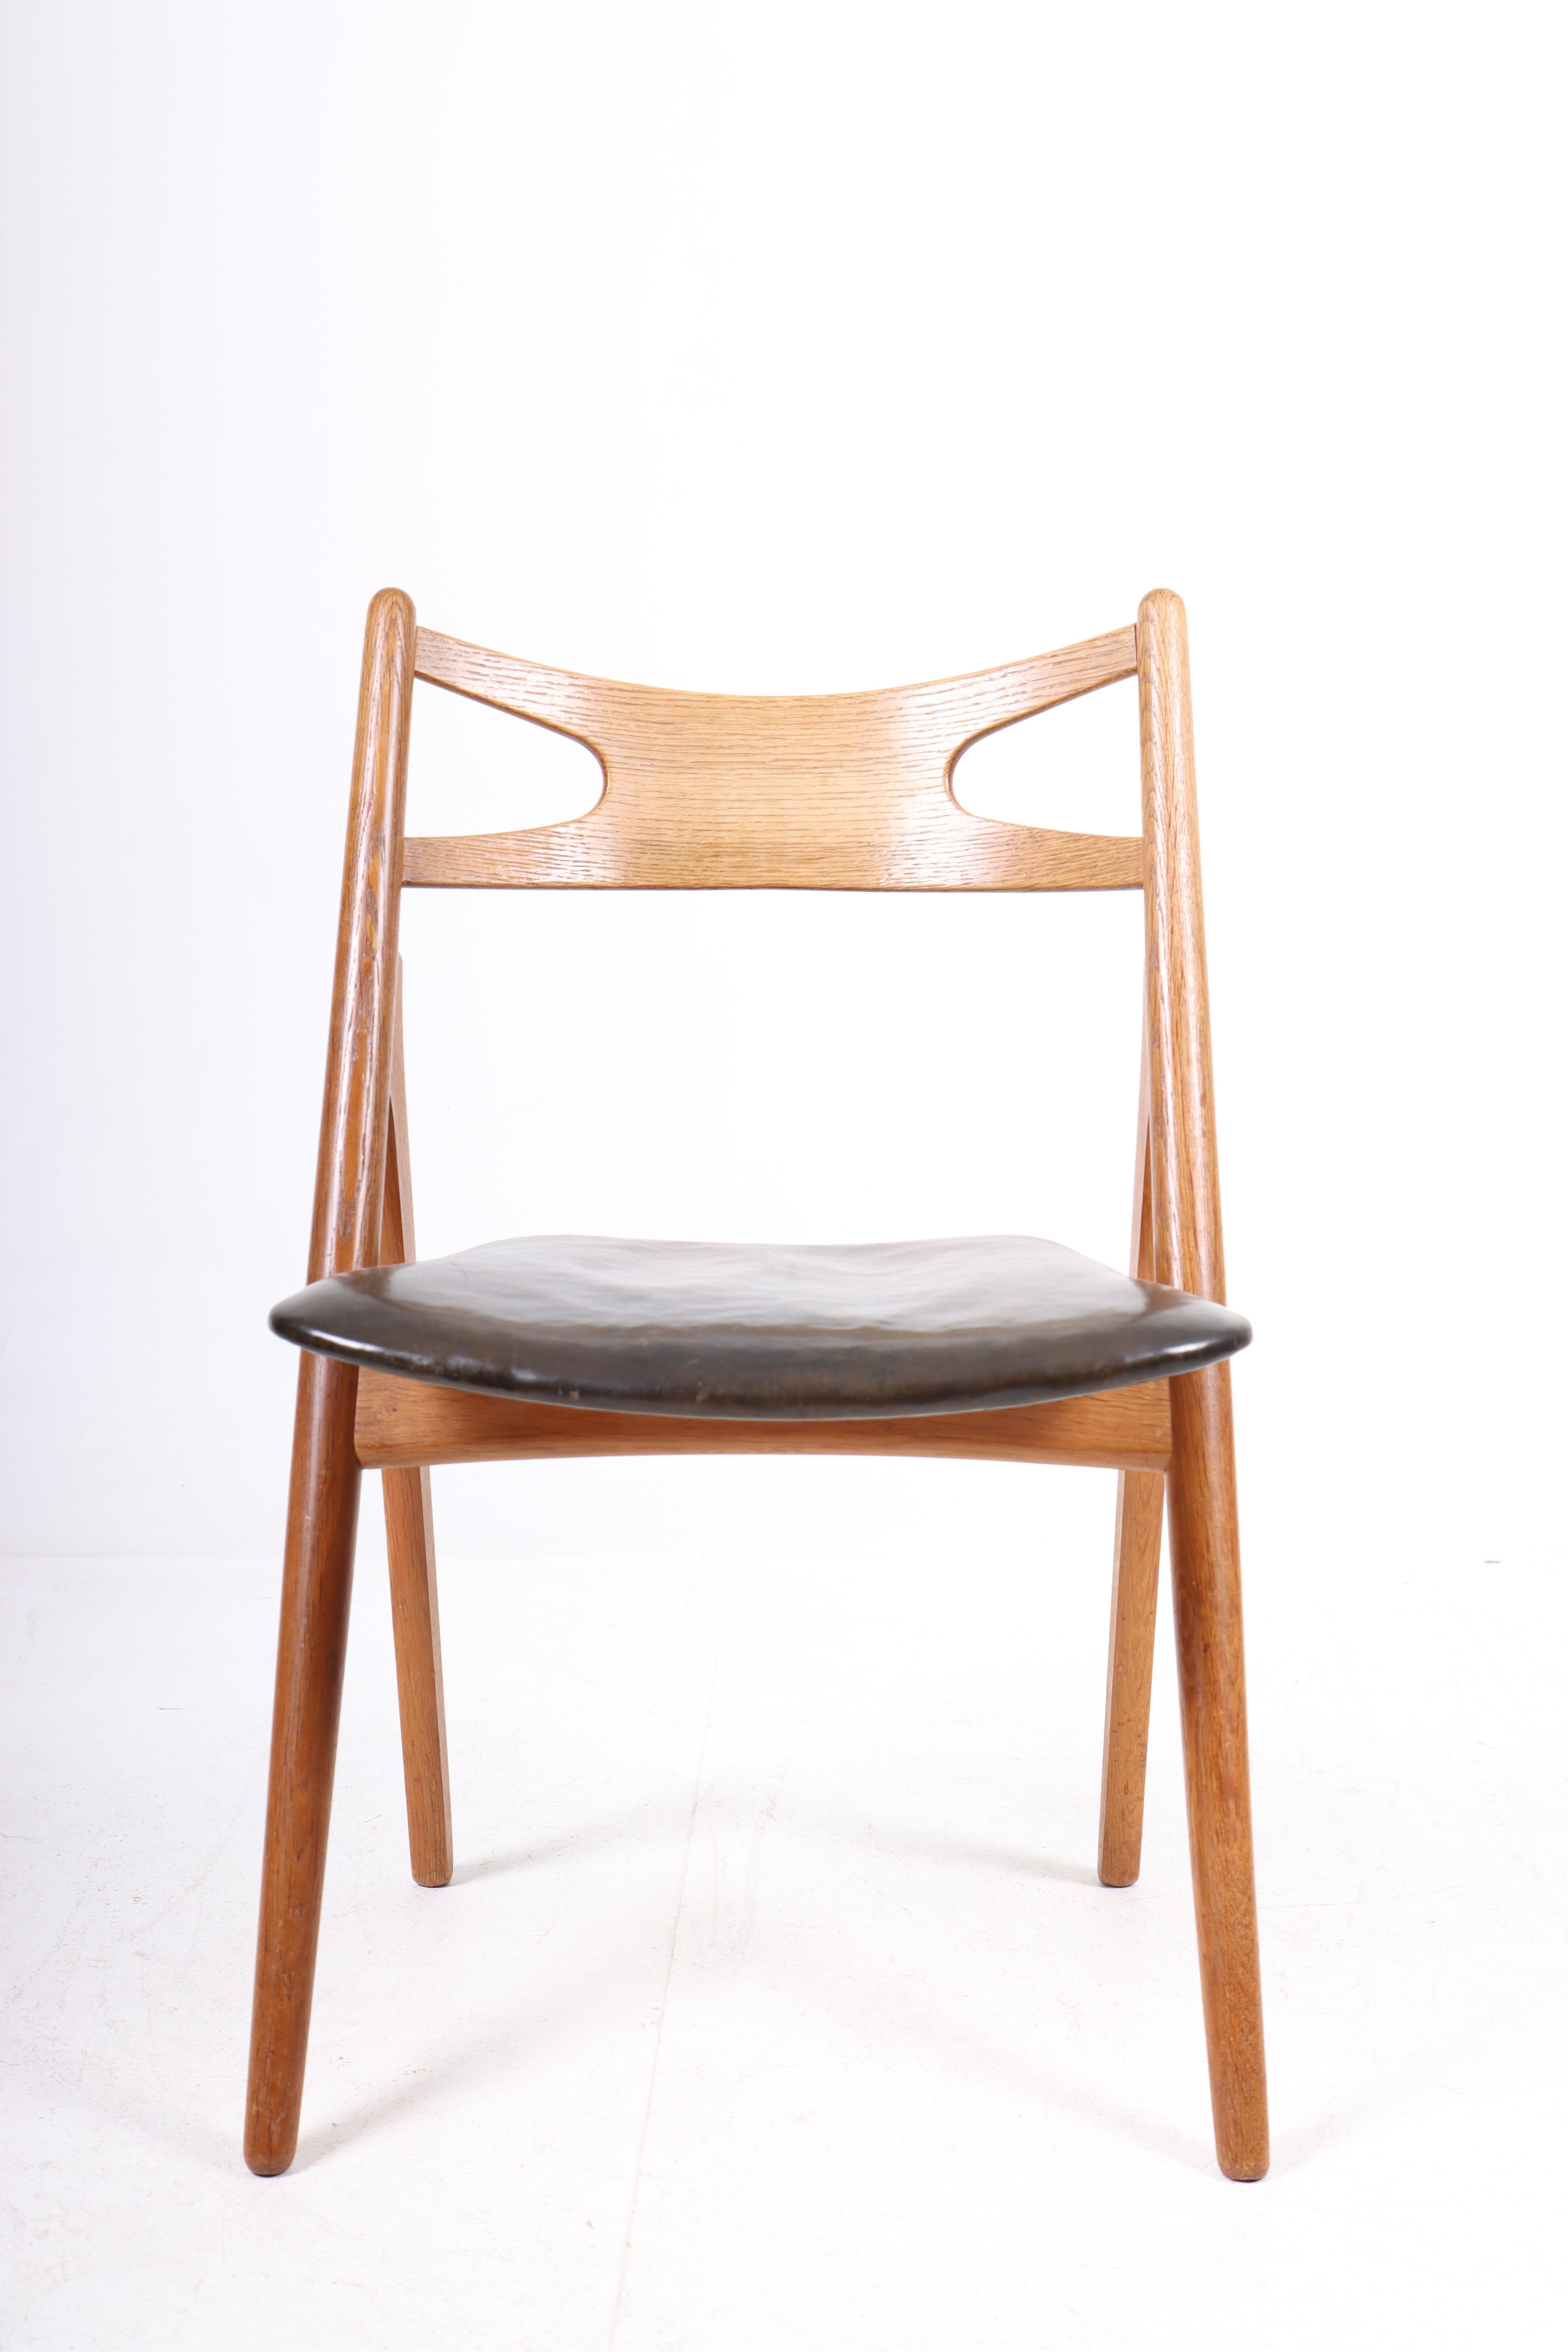 Set of four side chairs is in oiled oak and original patinated leather. Designed by Hans J. Wegner and made by Carl Hansen & Søn in the 1950s. The model name is CH29.